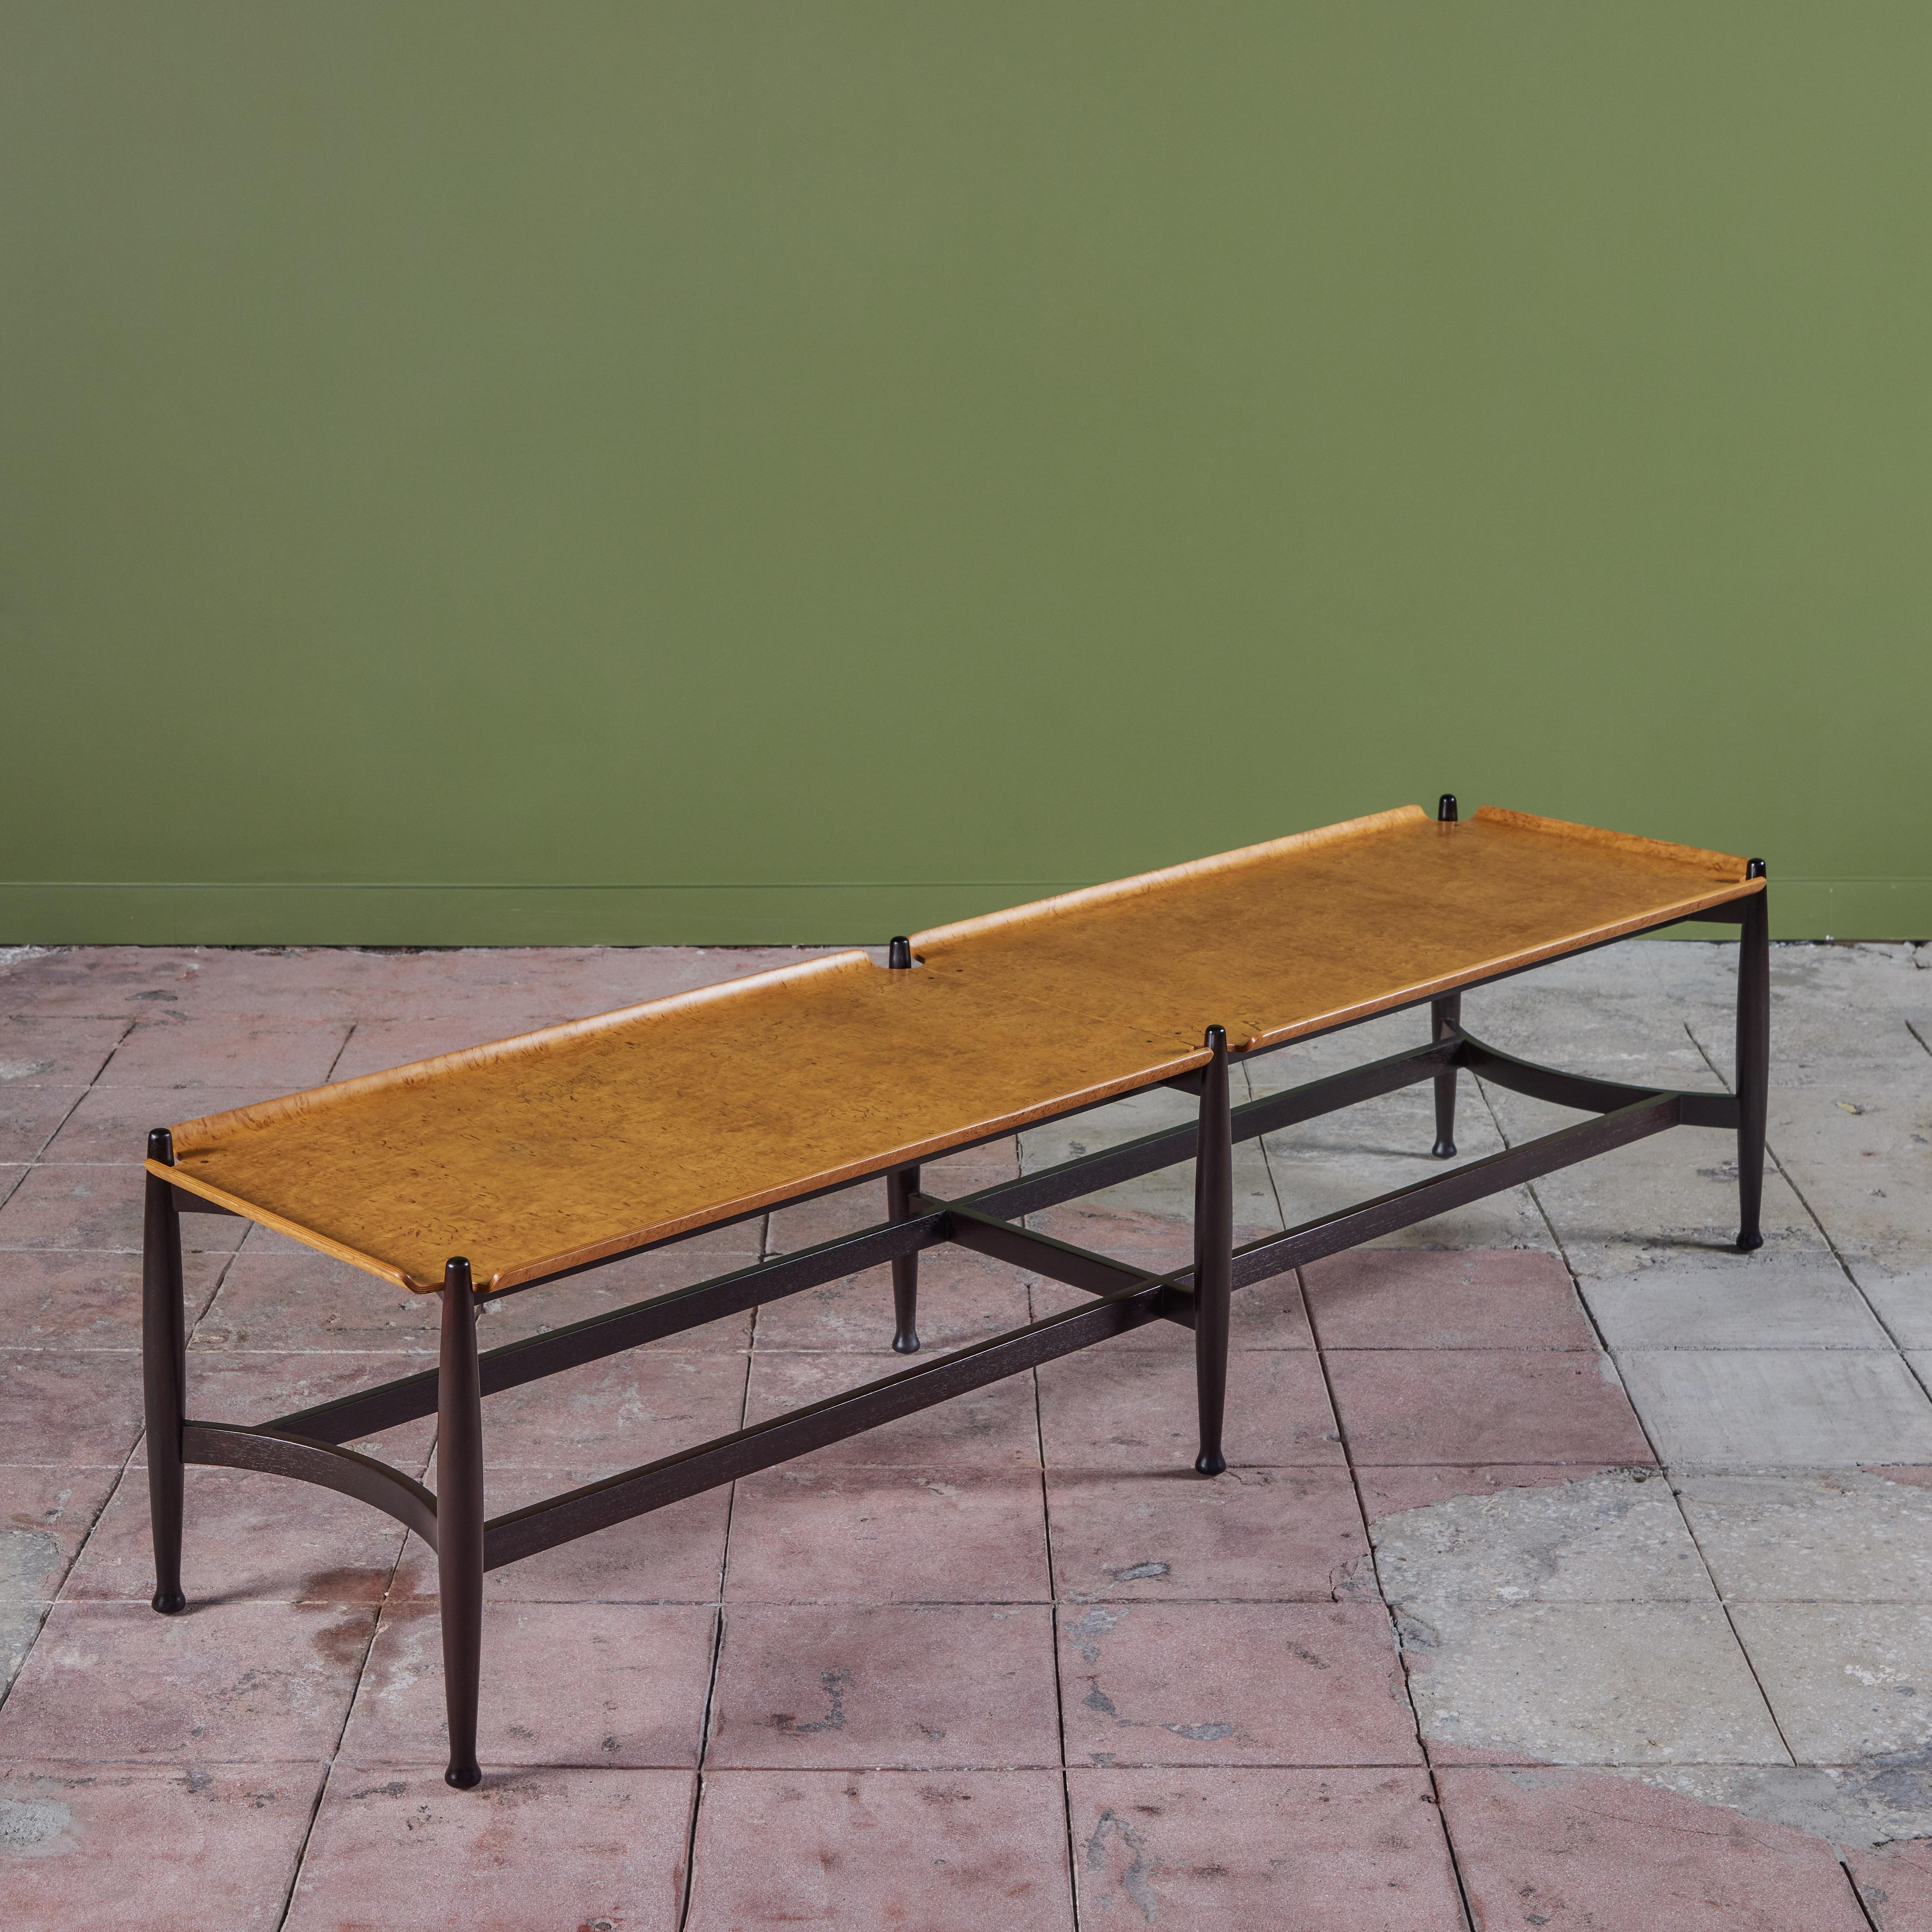 Coffee table designed by Edward Wormley for Dunbar, c.1950s, USA. The rectangular table features an ebonized base with six turned wood legs and stretchers that reach the length of the table. The maple burl tray table top has slightly raised edges